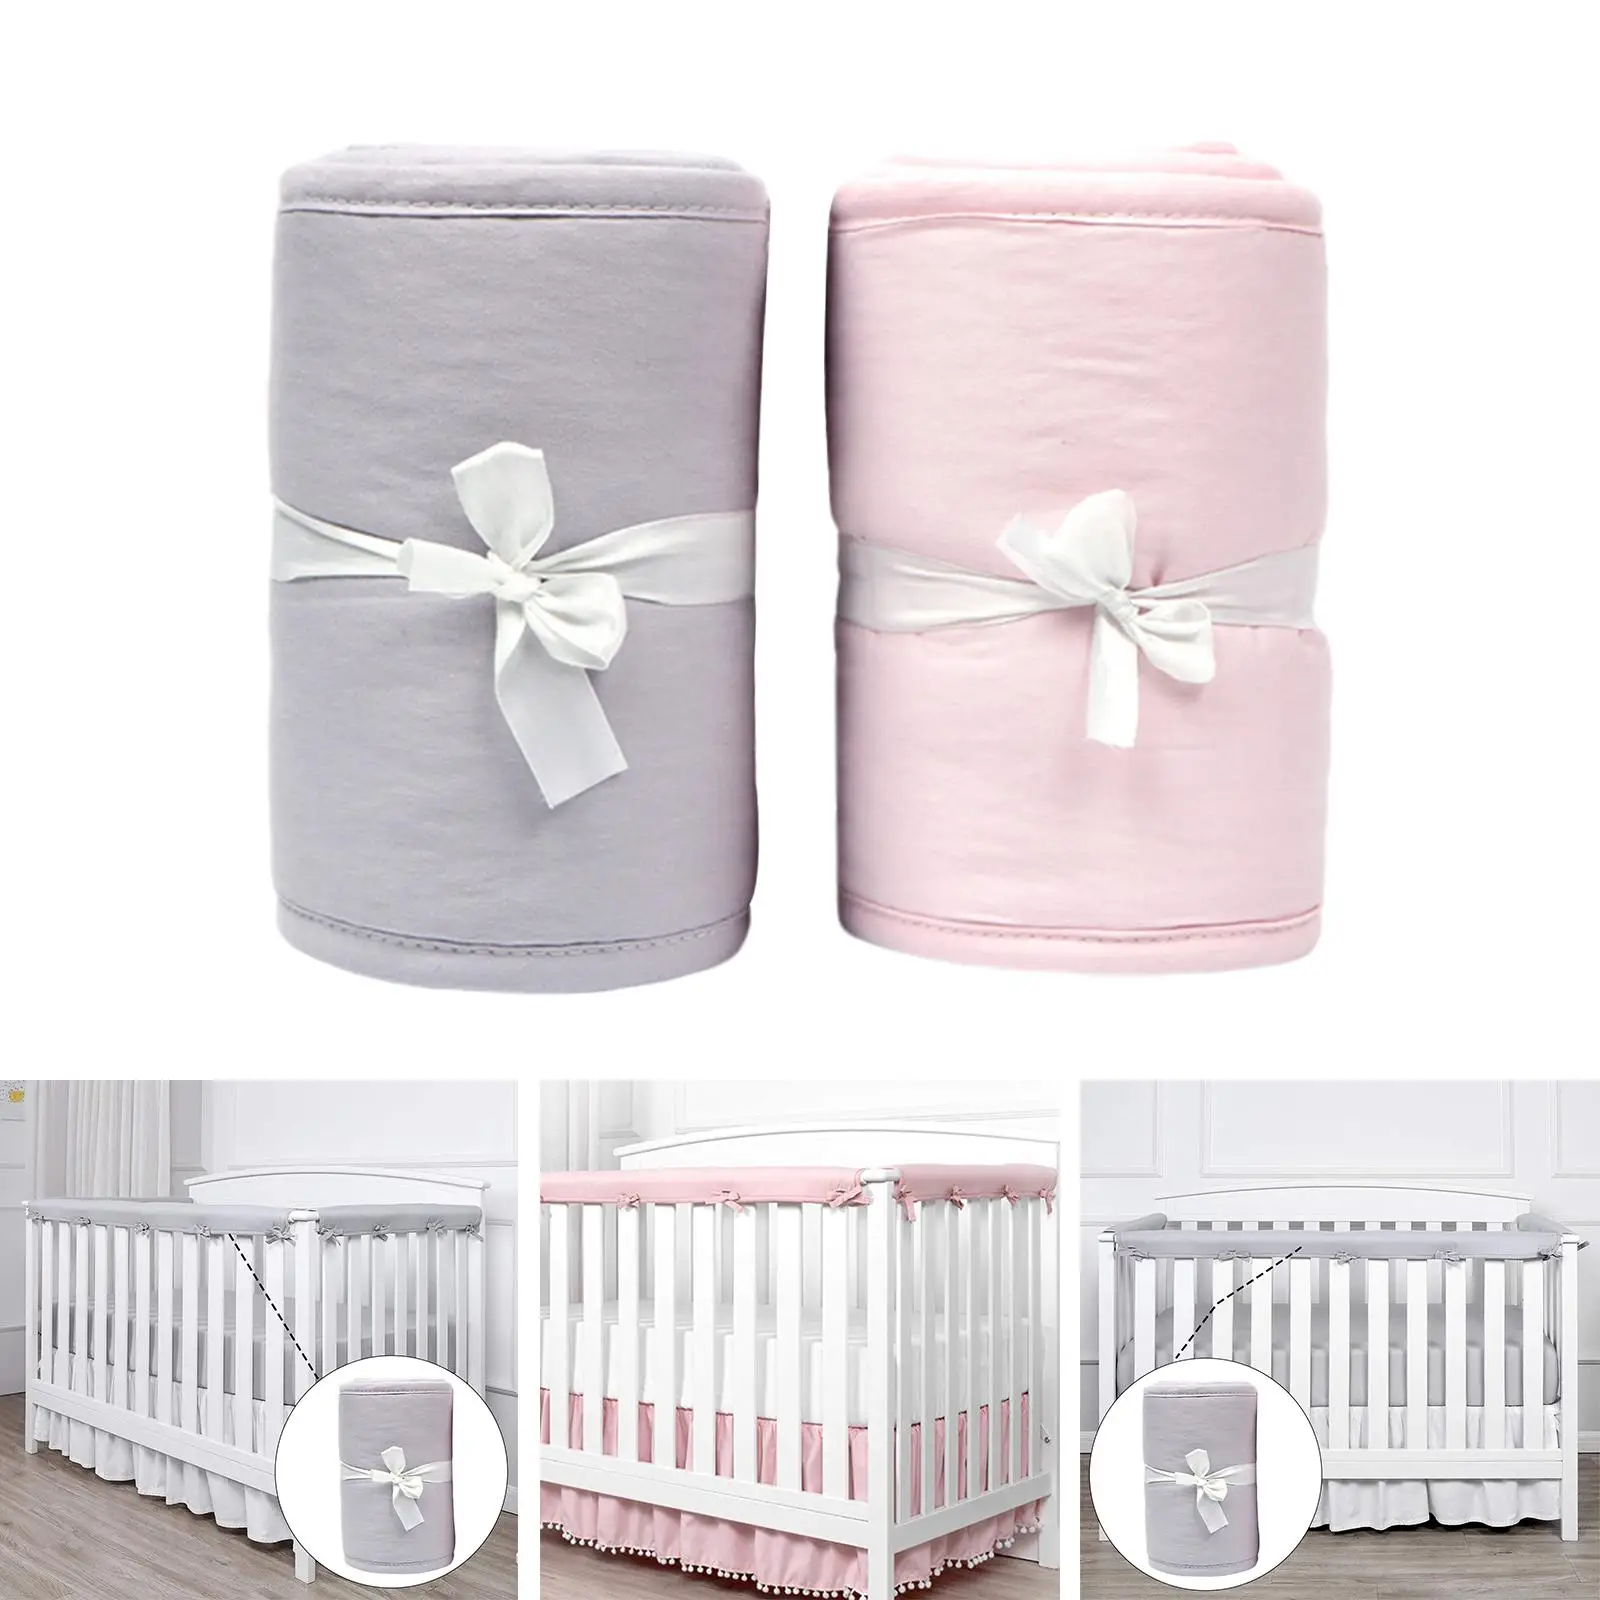 3x Baby Bed Rail Cover Guard Protection Bed Fence Guardrail Bumper Crib Wrap Rail Cover for Gifts Safety Newborn Baby Toddlers